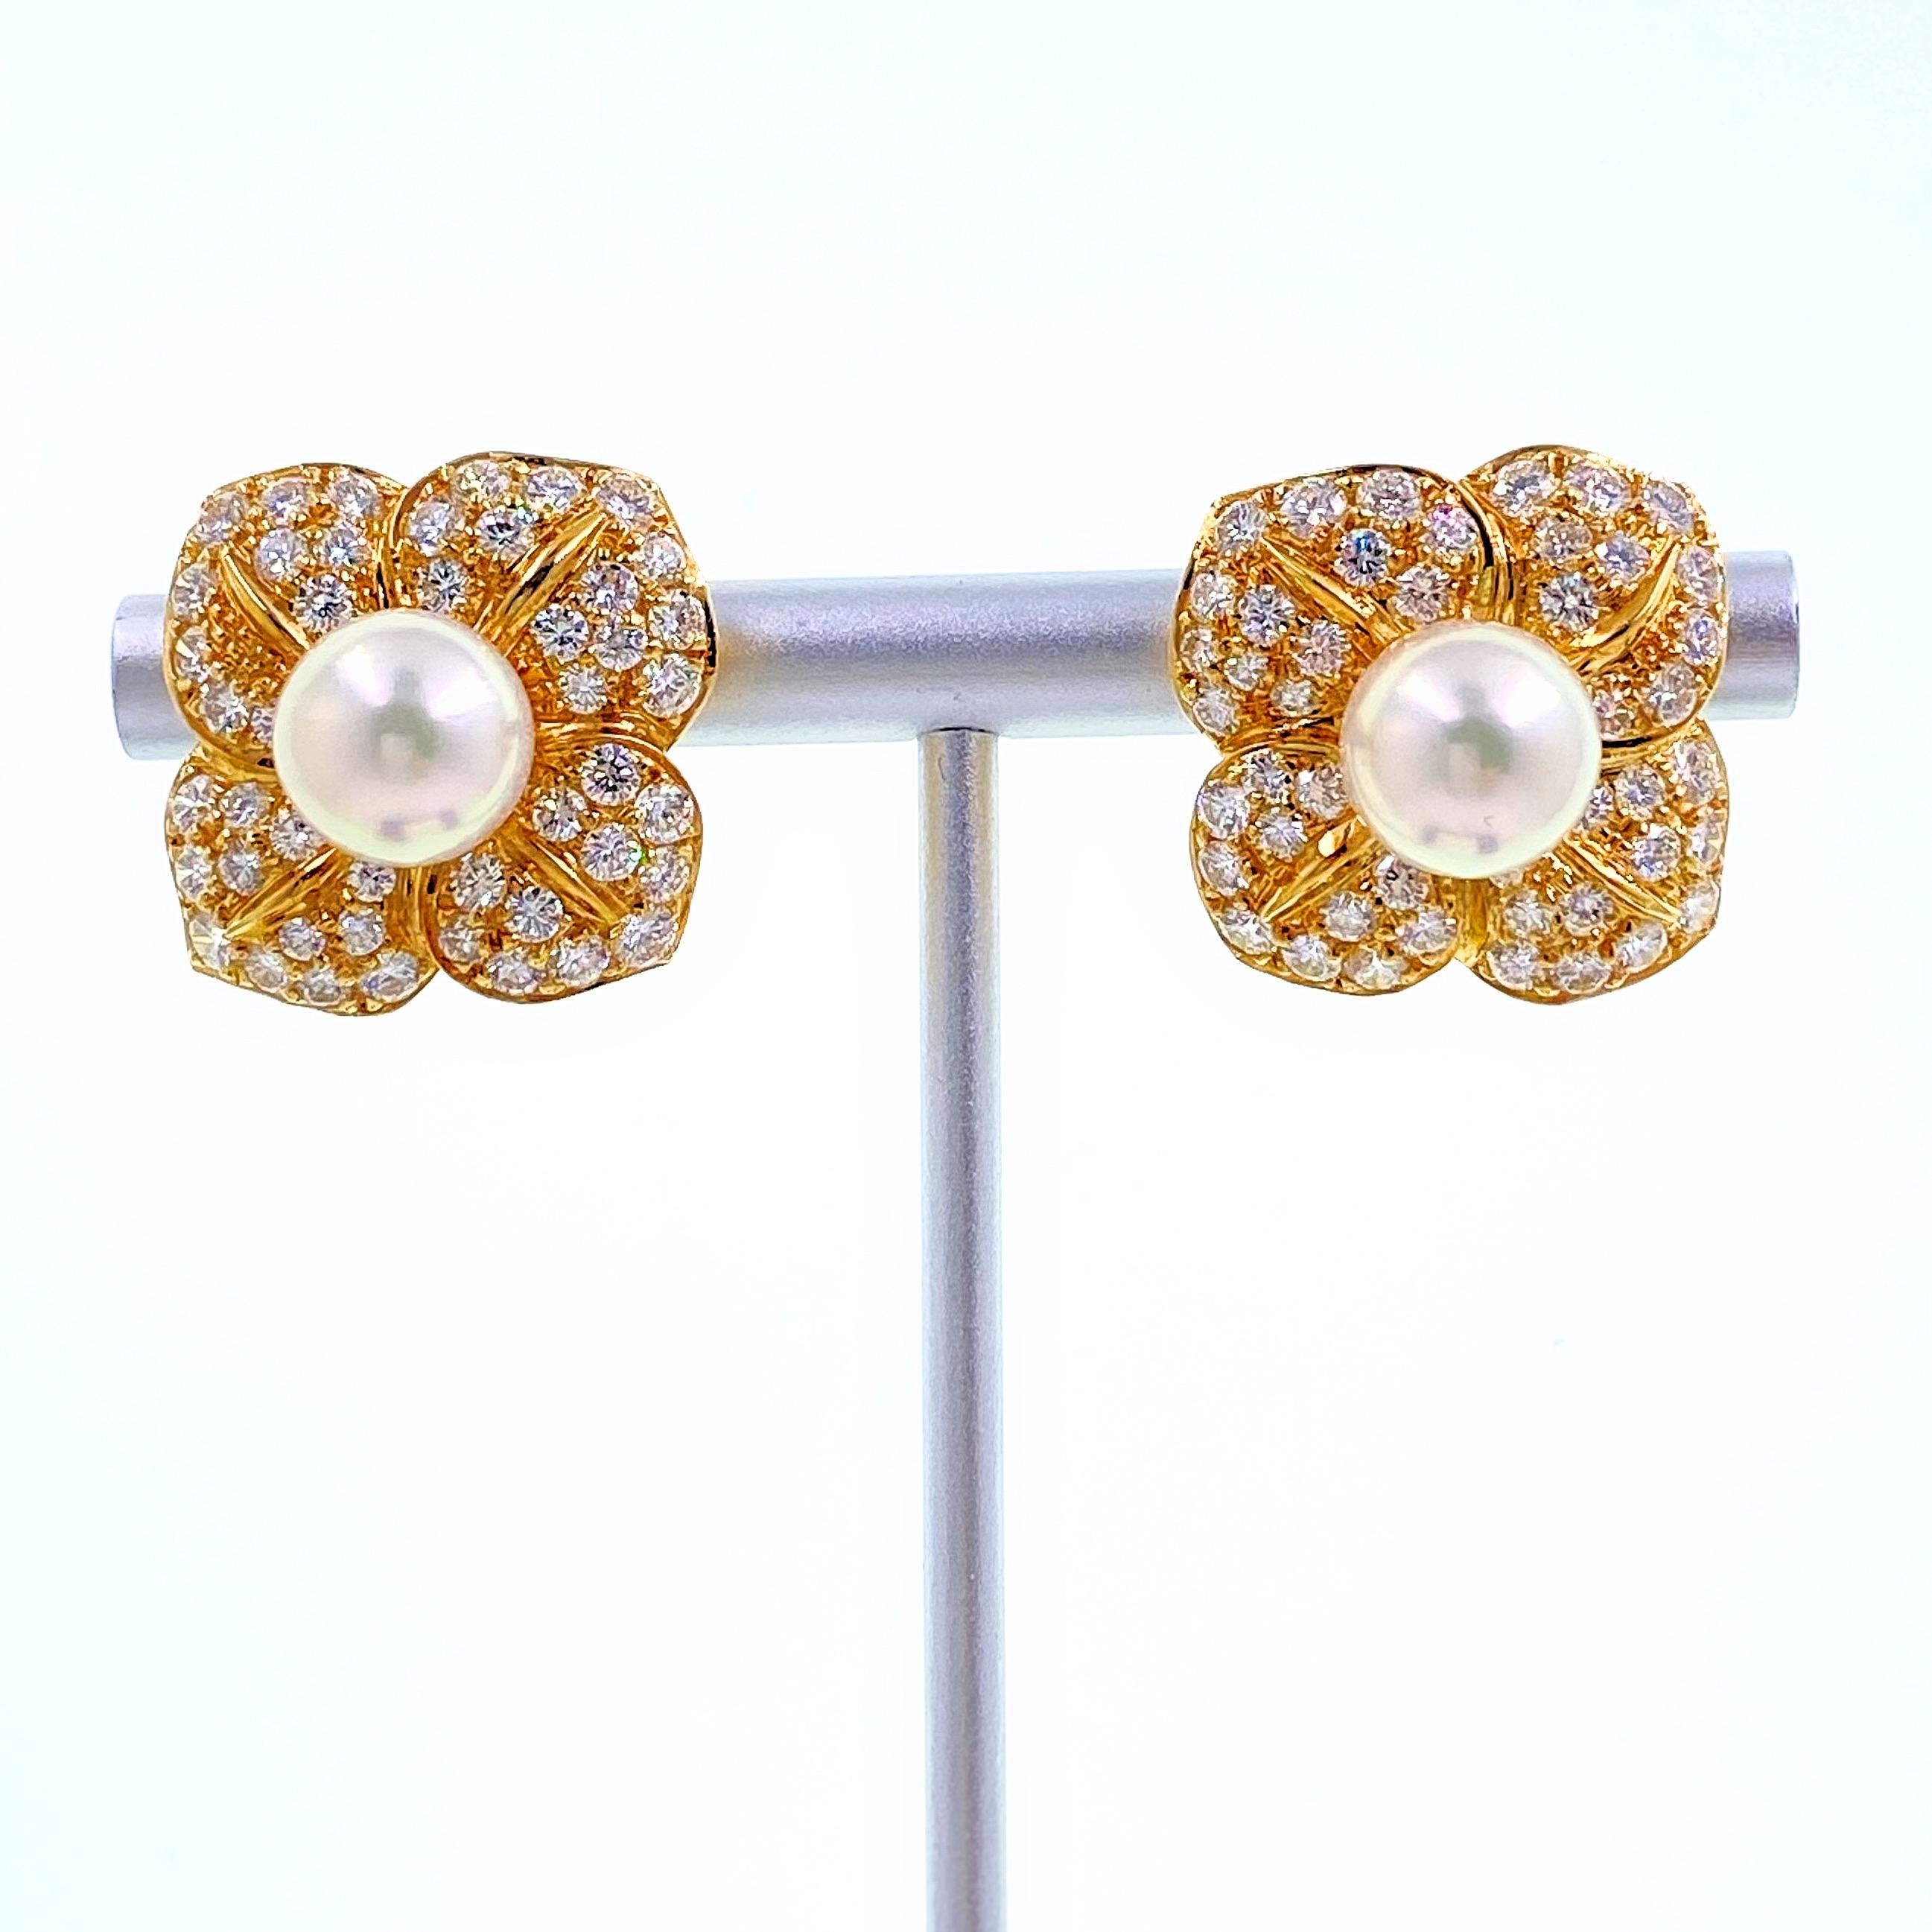 Mikimoto Pavé Diamond Pearl Floral Earrings in 18 Karat Yellow Gold In Excellent Condition For Sale In San Diego, CA